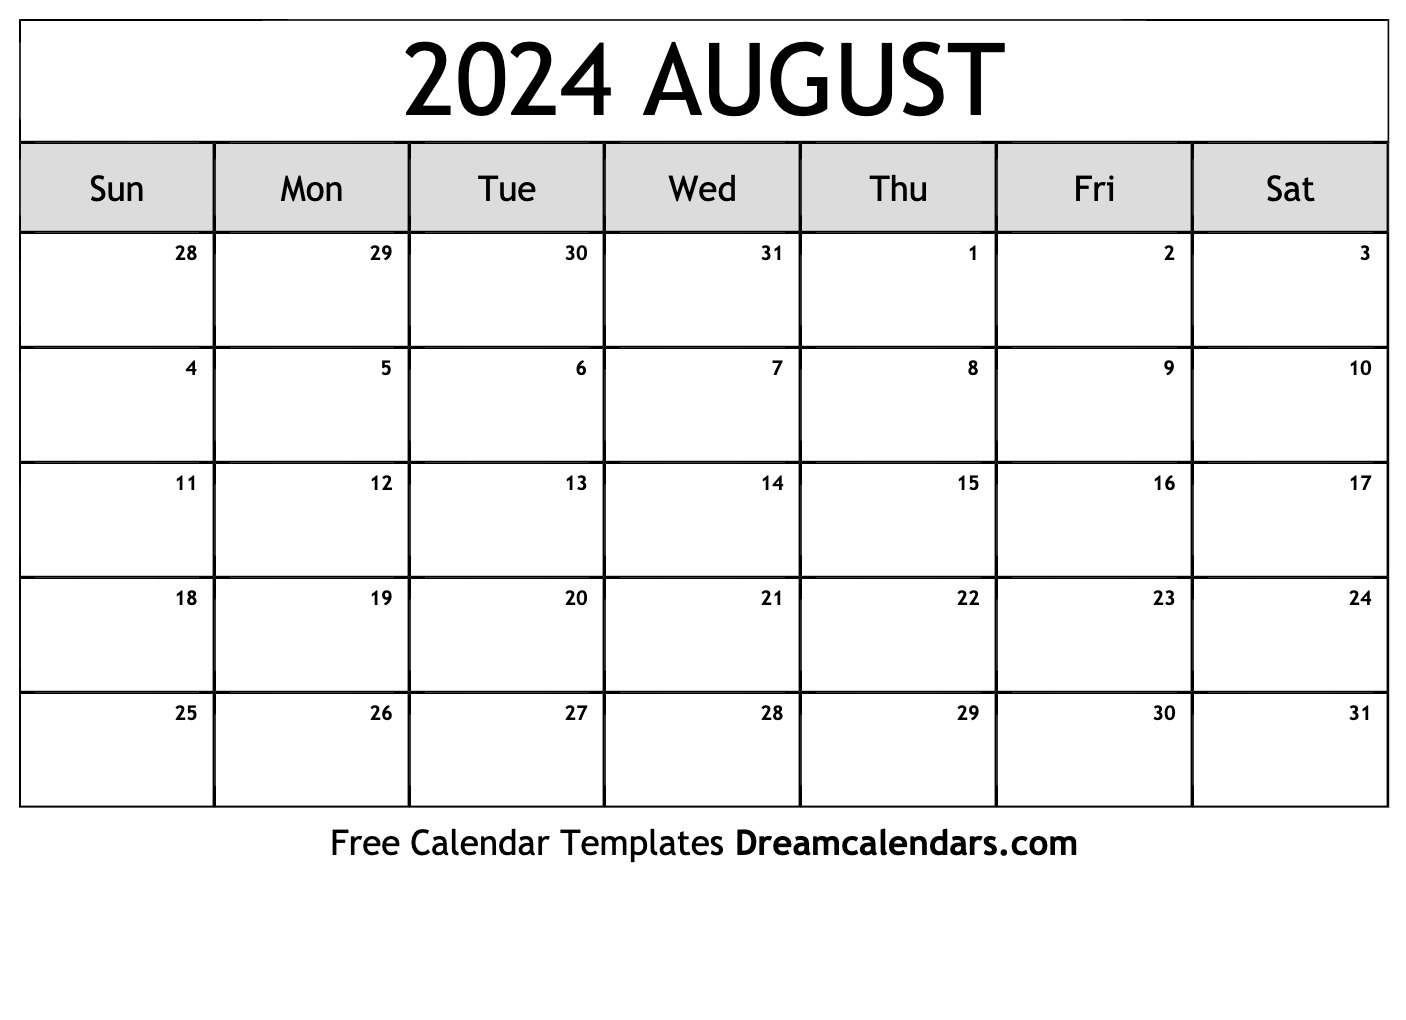 August 2024 Calendar | Free Blank Printable With Holidays for Calendar 2024 August Printable